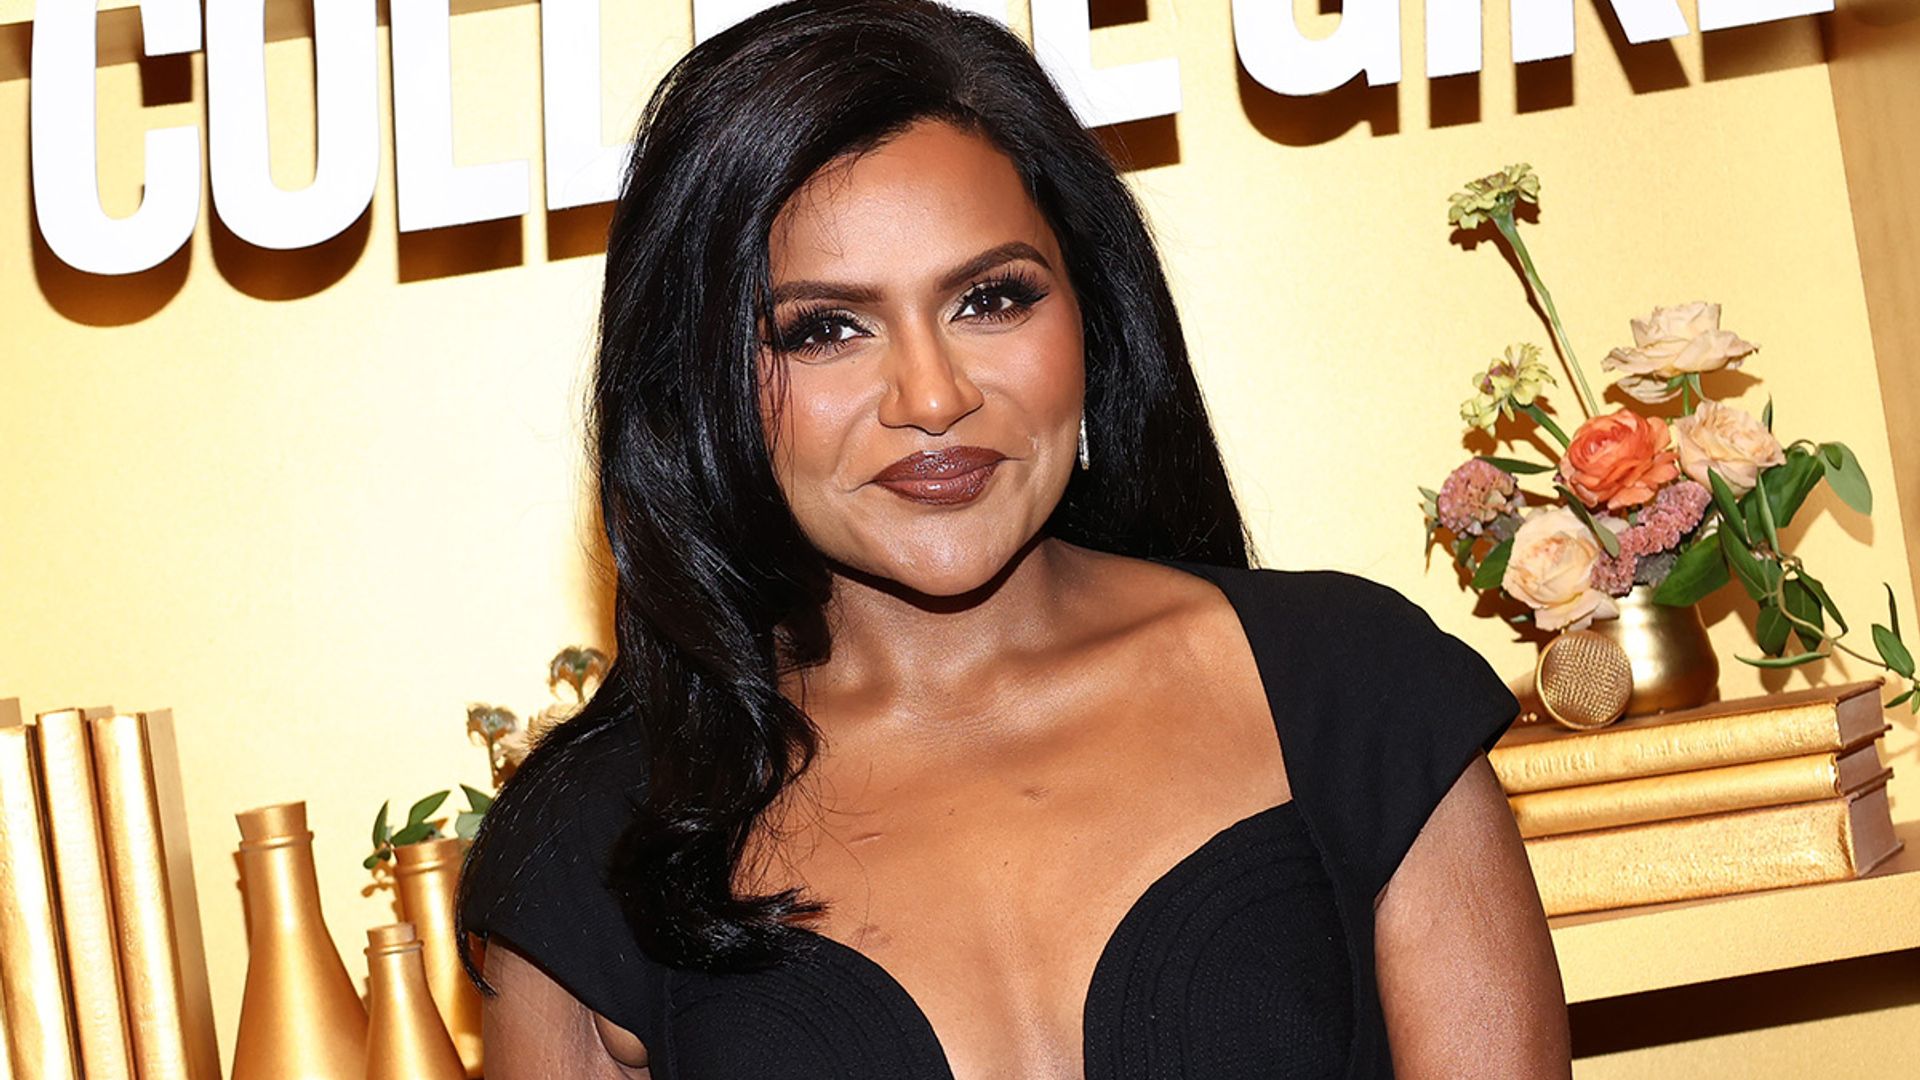 Mindy Kaling weight loss Her secrets revealed after unrecognizable